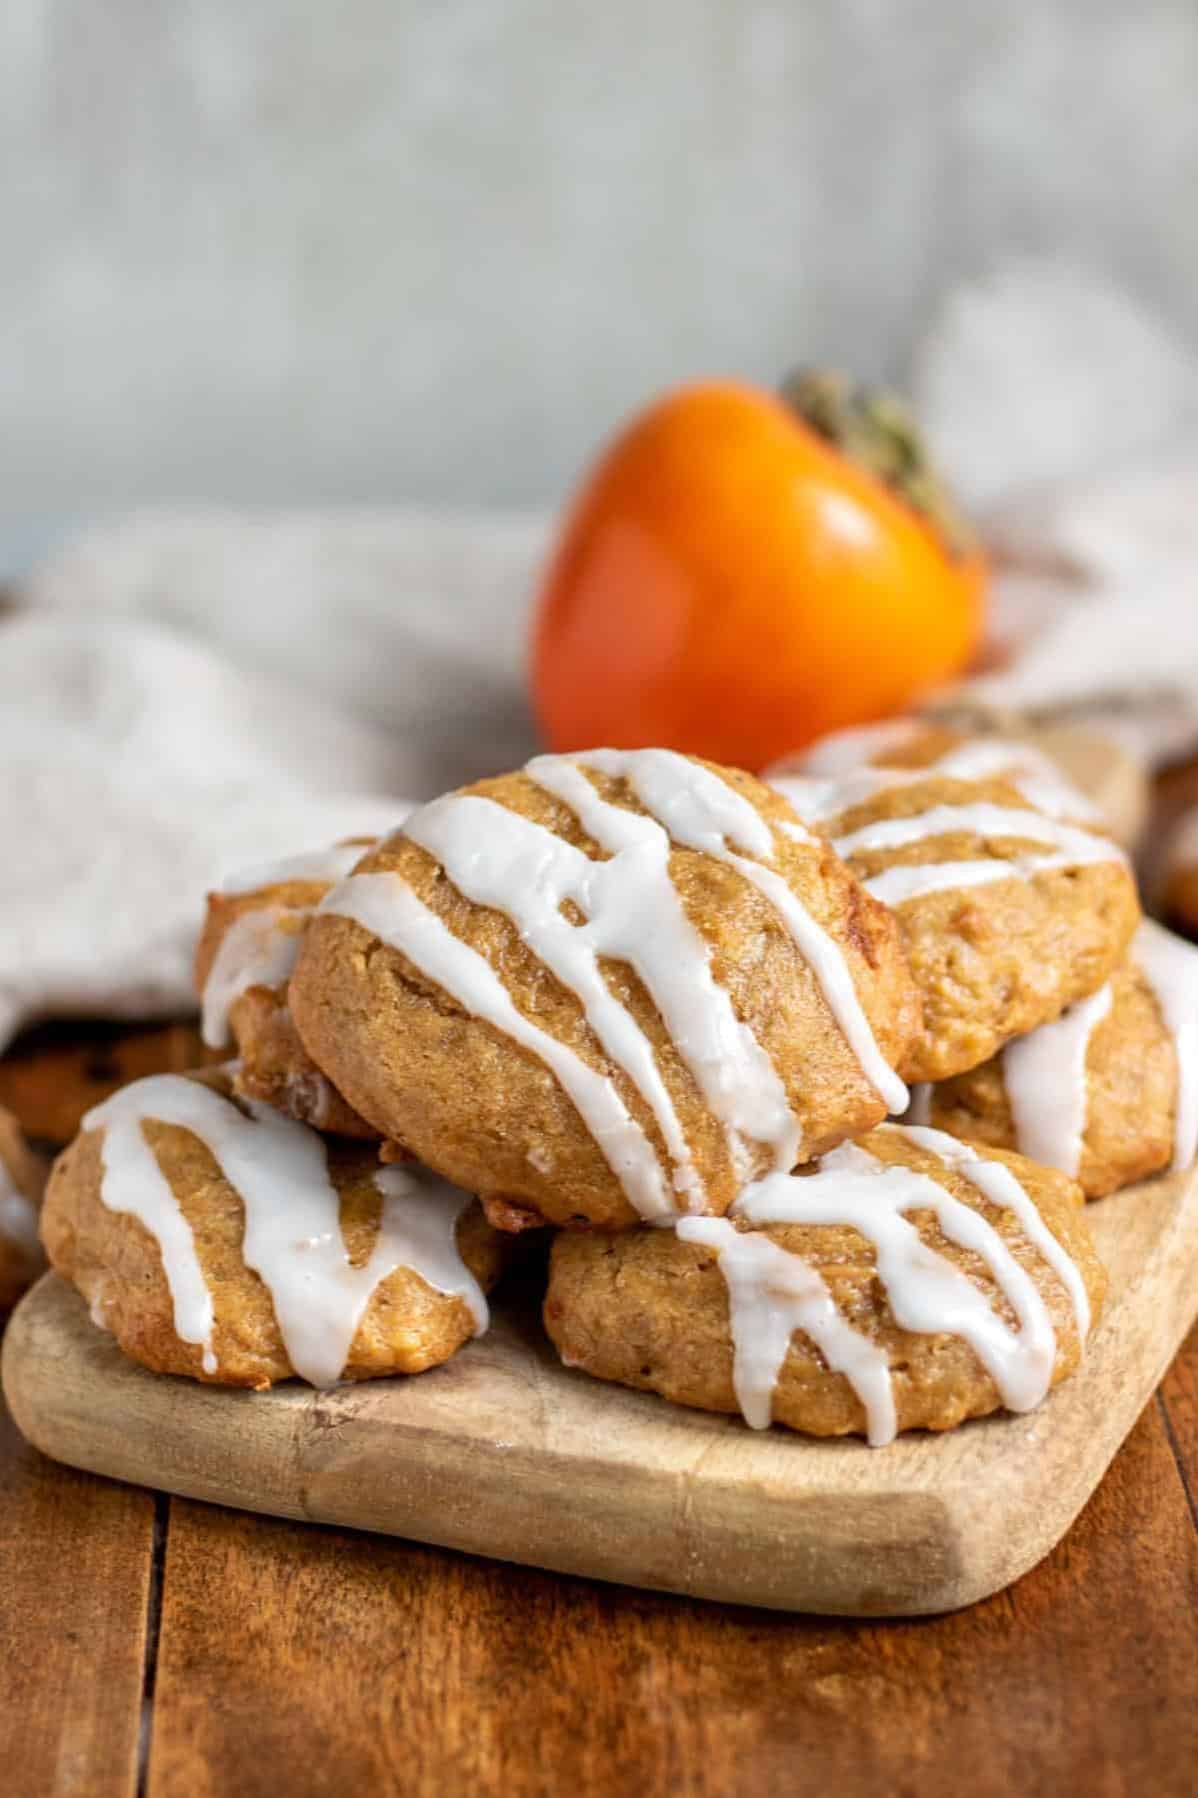  Soft, chewy, and irresistible persimmon cookies!